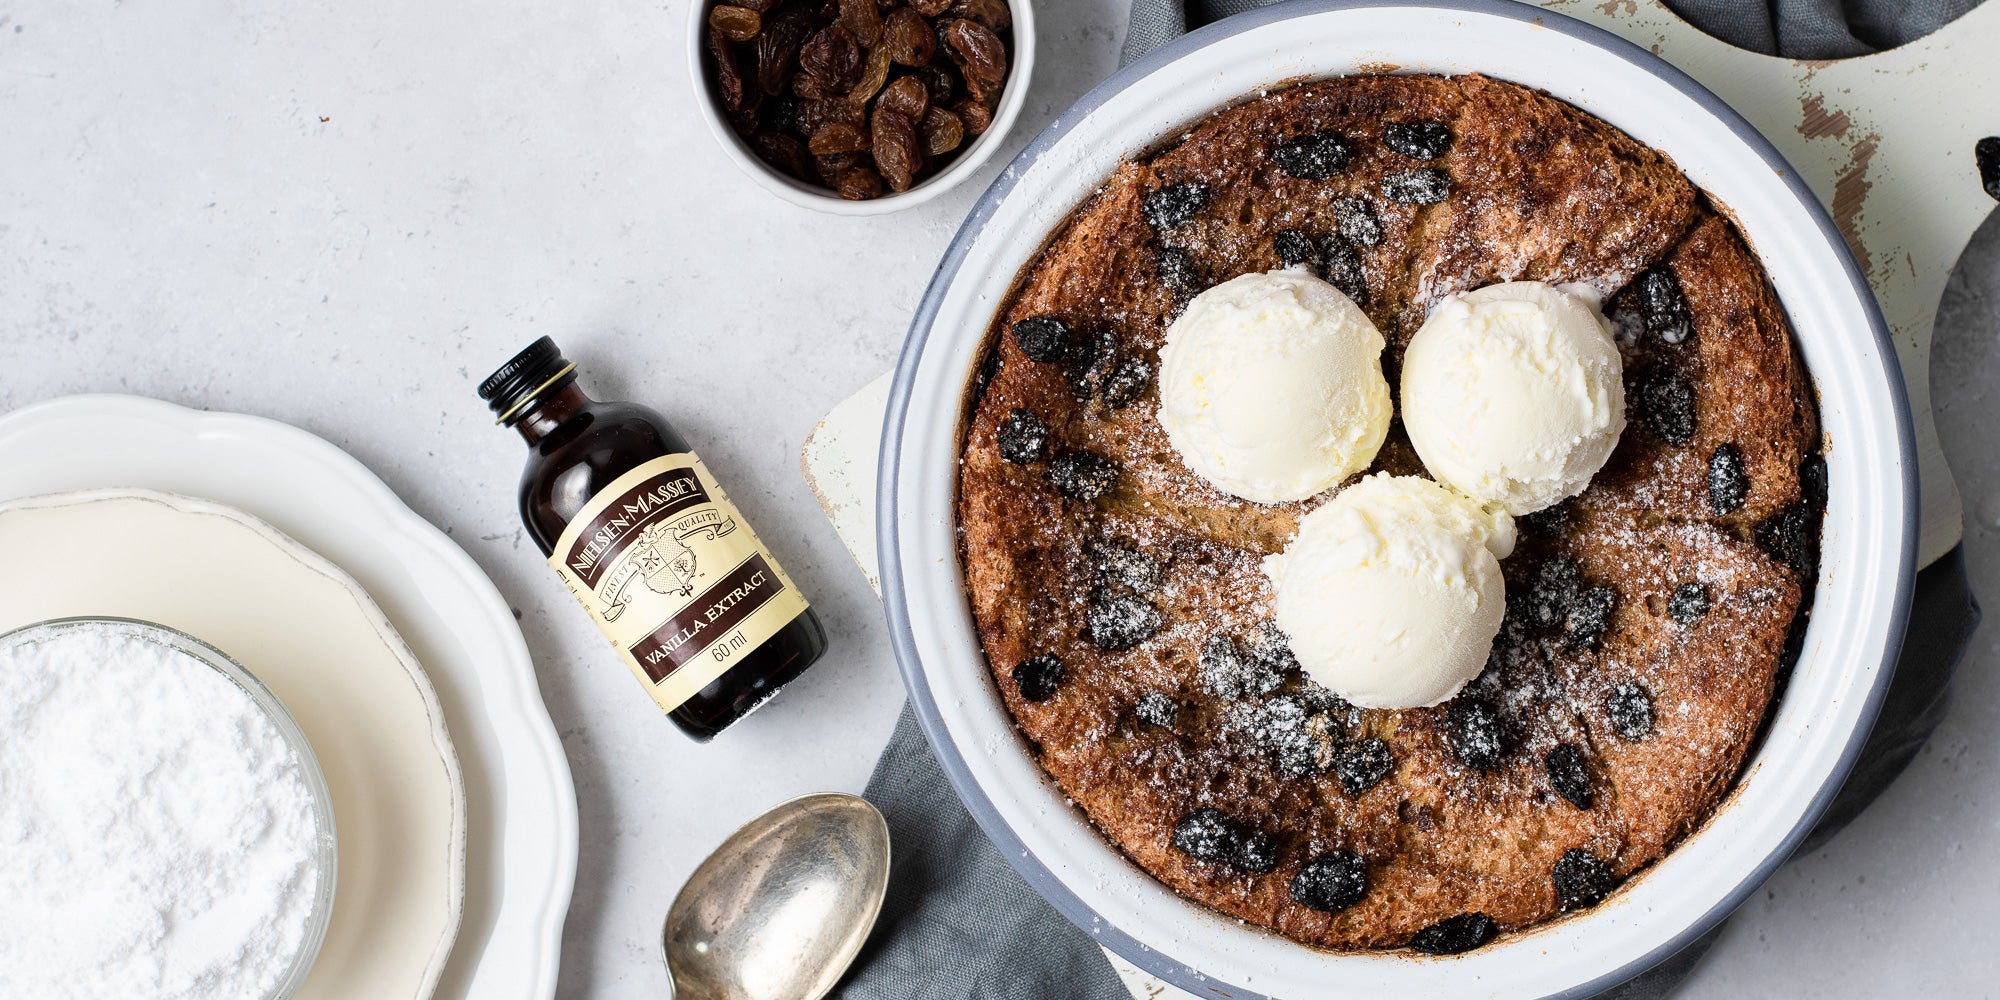 Bread and butter pudding in a bowl with 3 scoops of ice cream on top and vanilla bottle with spoon